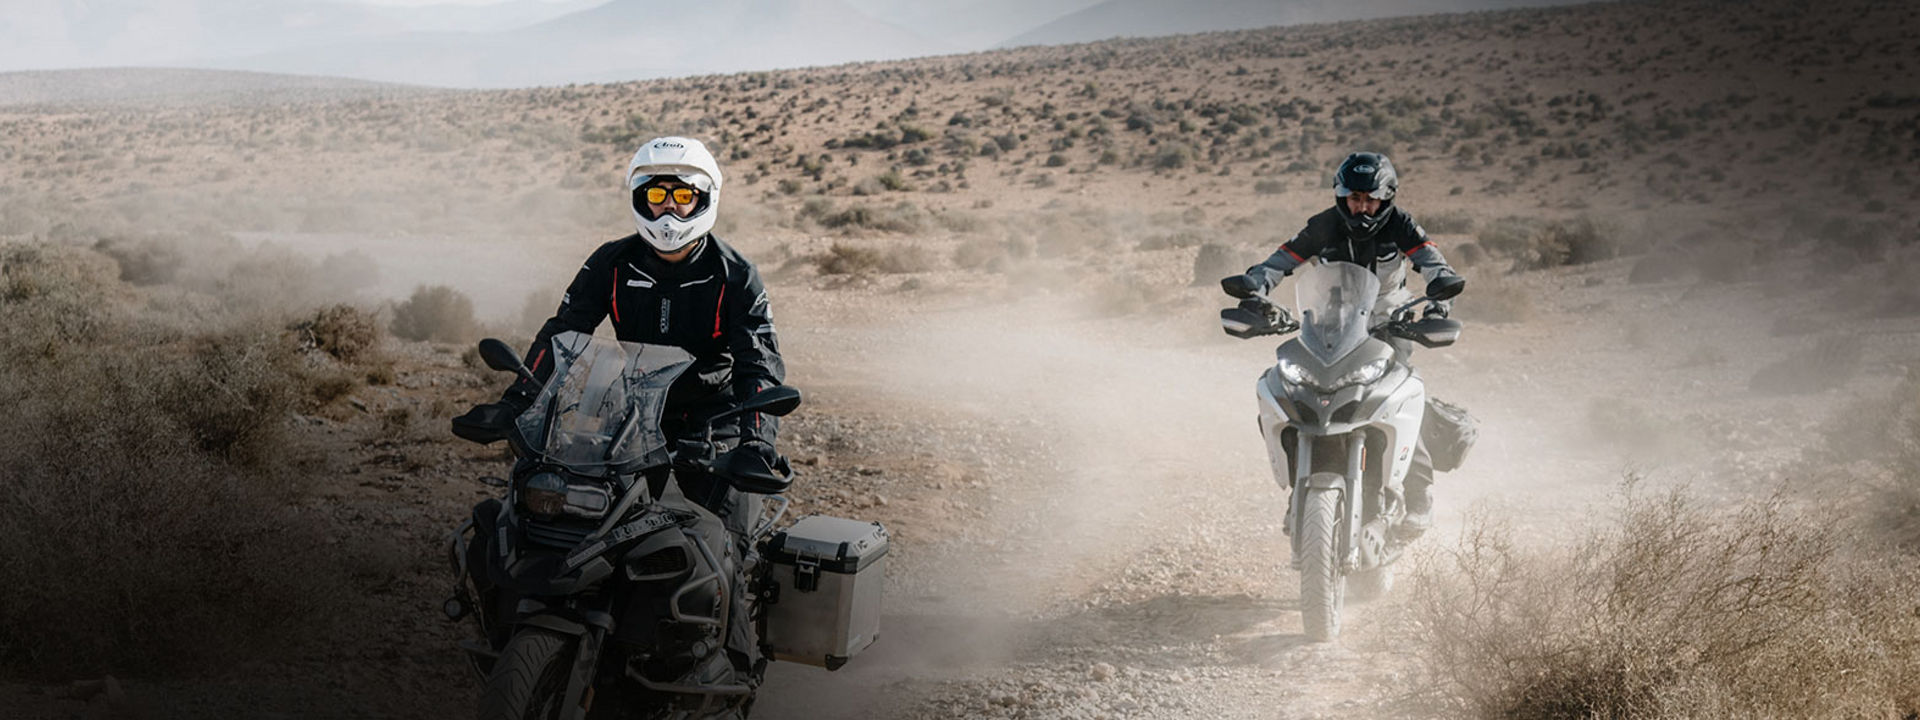 This image shows two motorcyclists using Bridgestone adventure tyres to explore a desert by motorcycle.